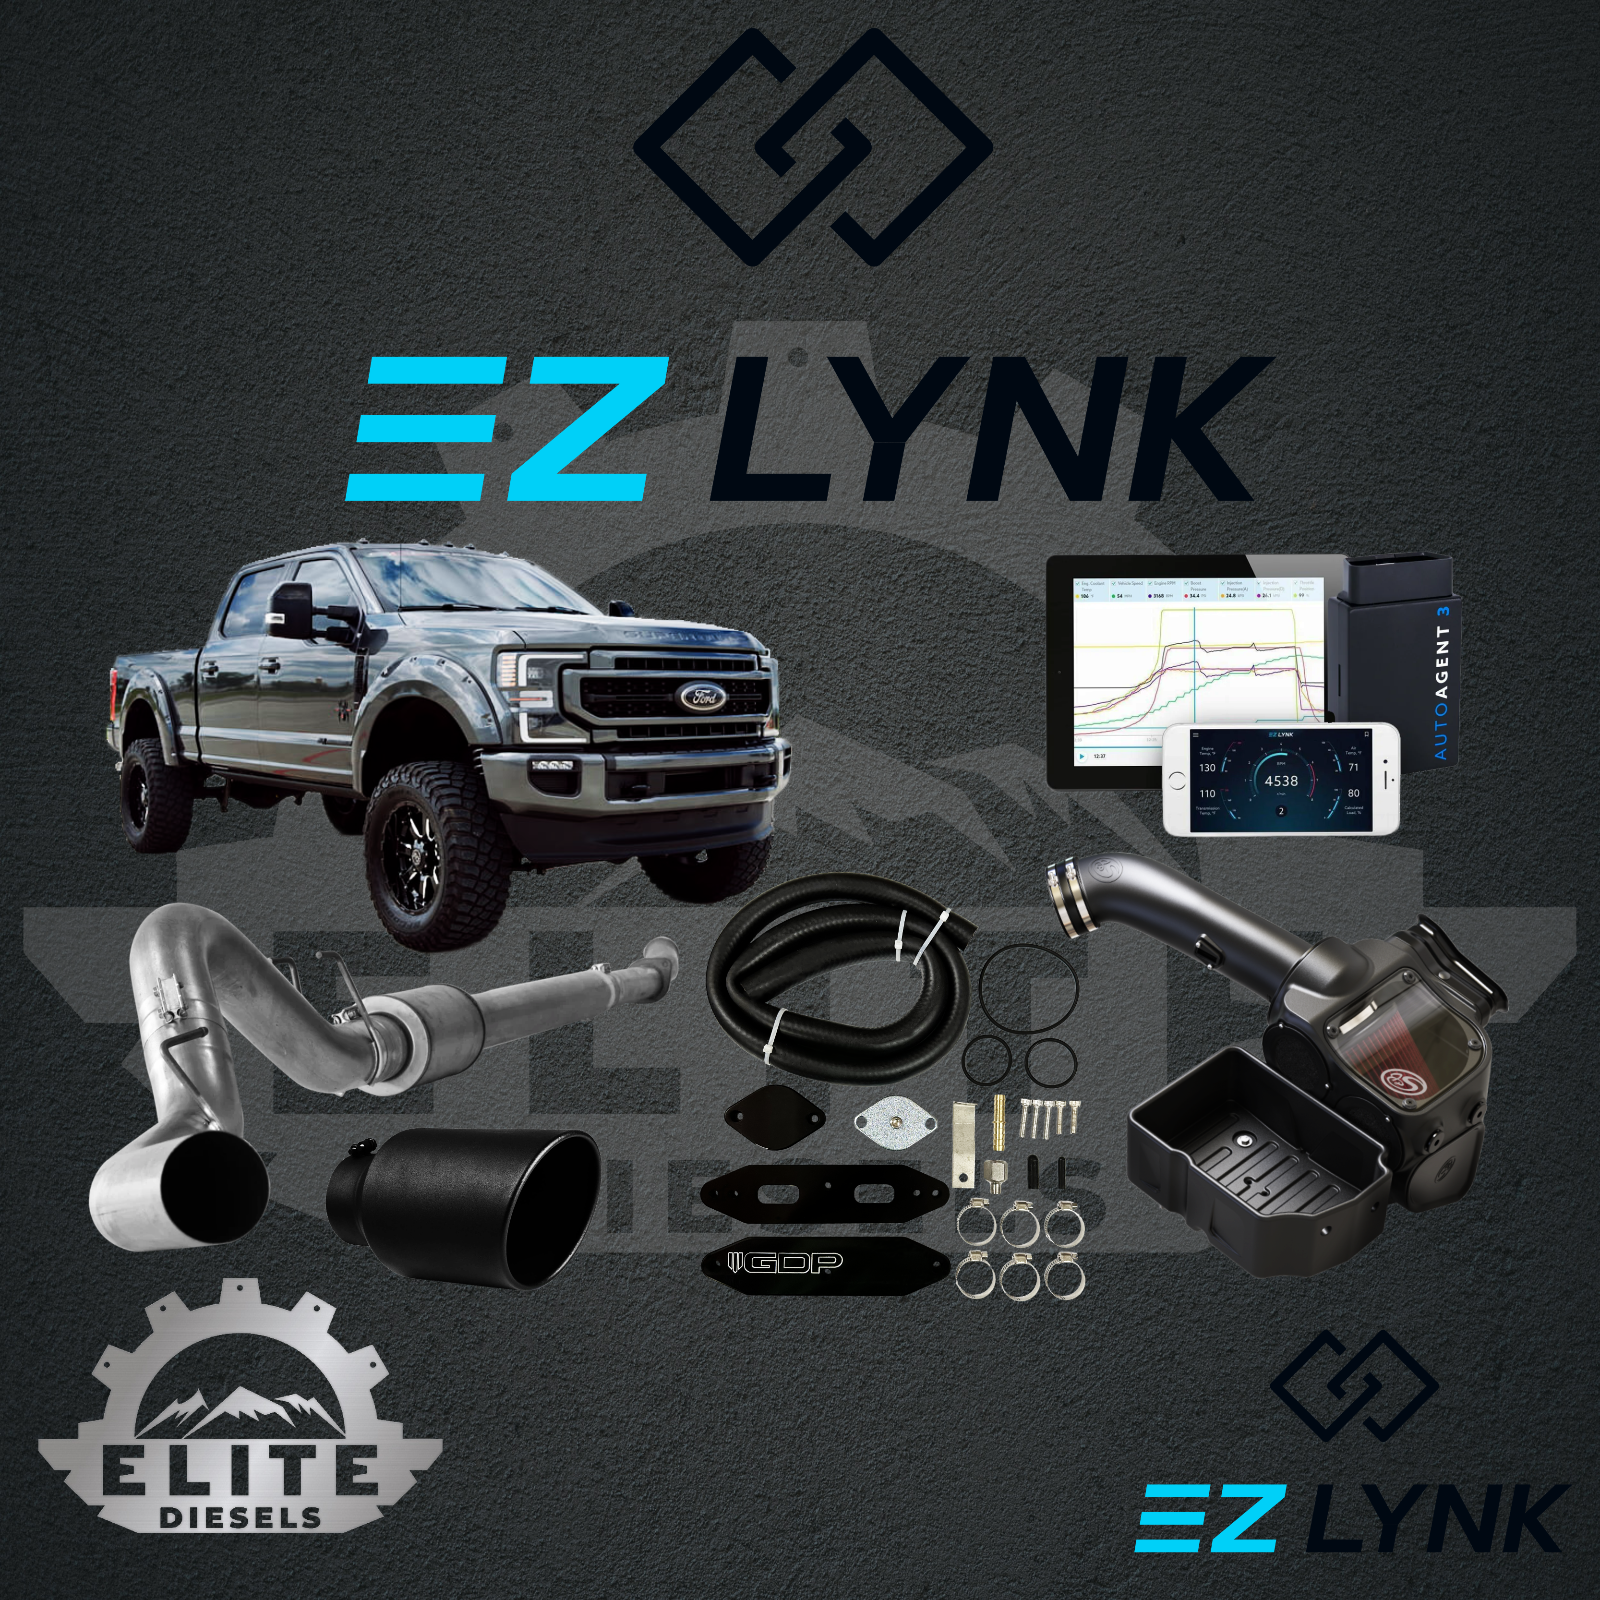 2008 - 2019 6.7L AND 6.4L FORD POWERSTROKE EZLYNK 3.0 TUNER ALL-IN-ONE CUSTOMIZABLE KIT.